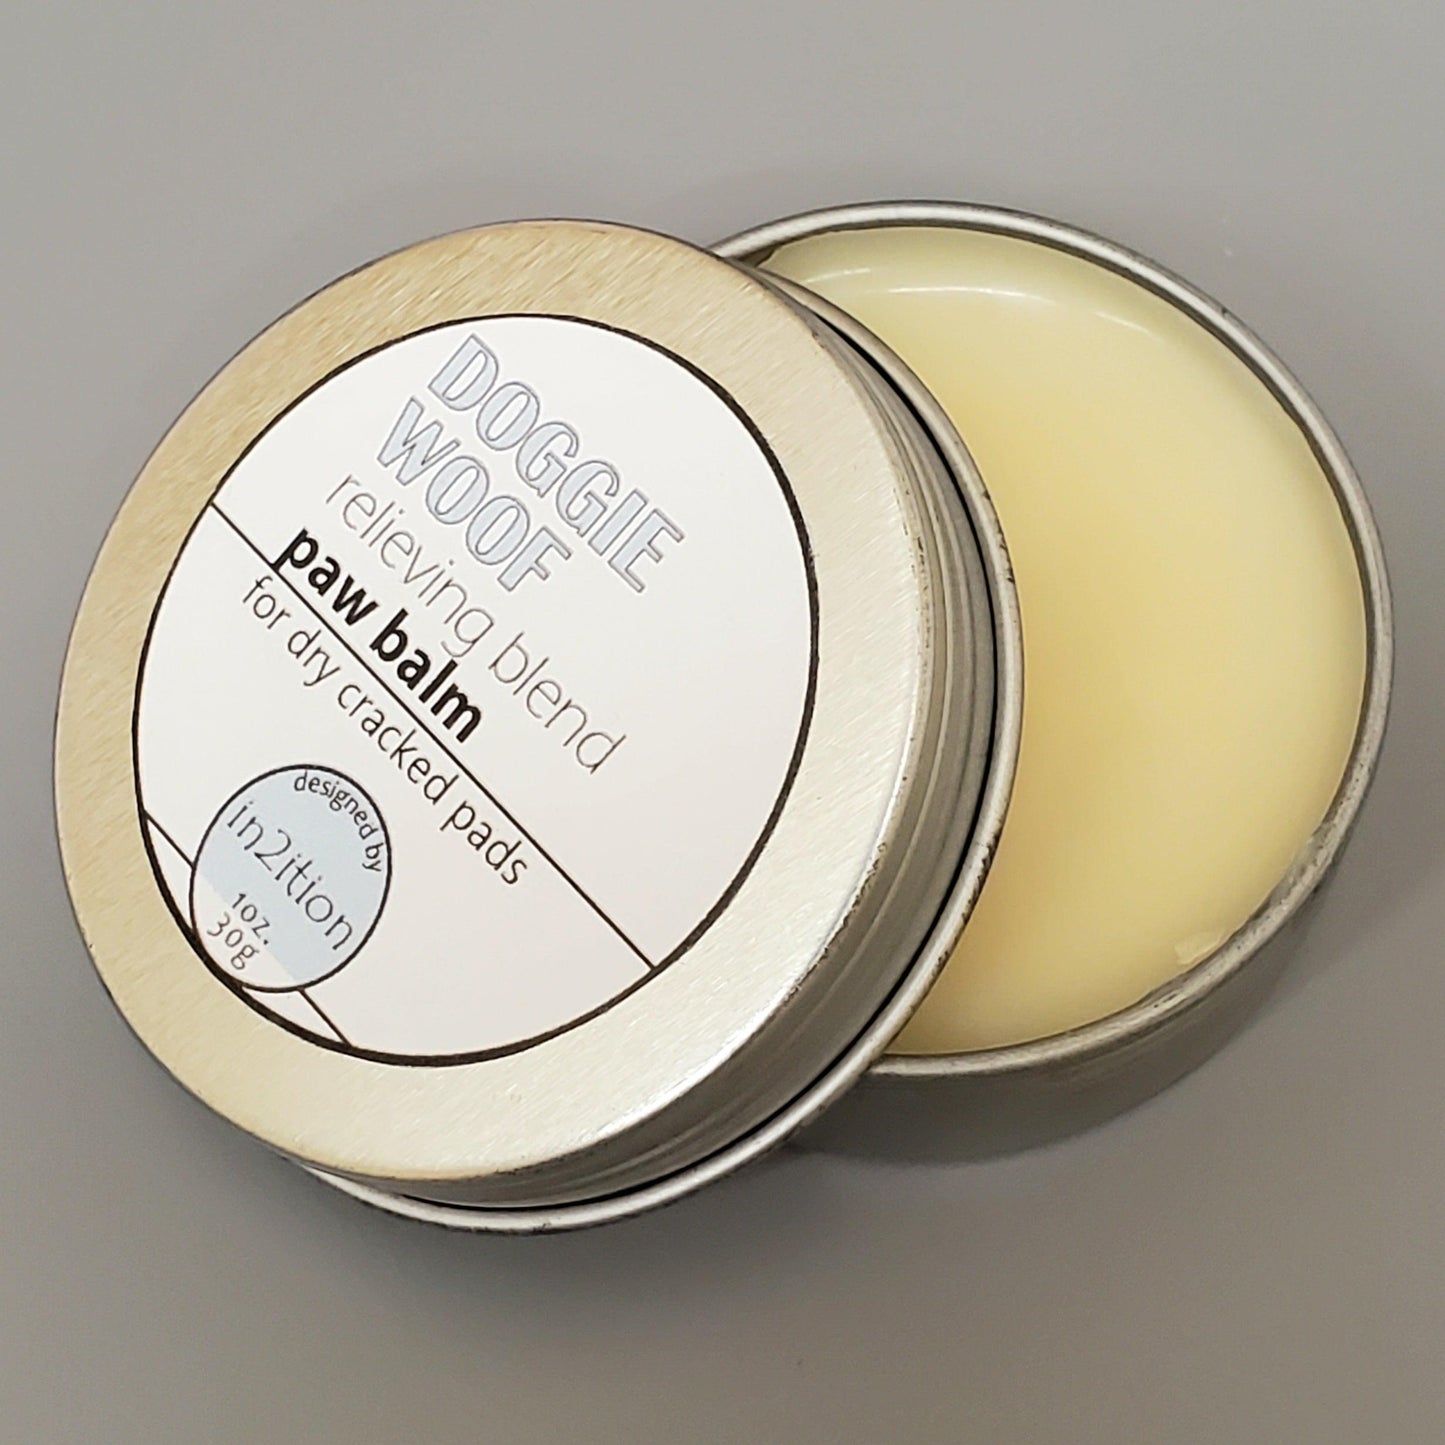 Doggie Paw Balm-Pets-in2ition mercantile